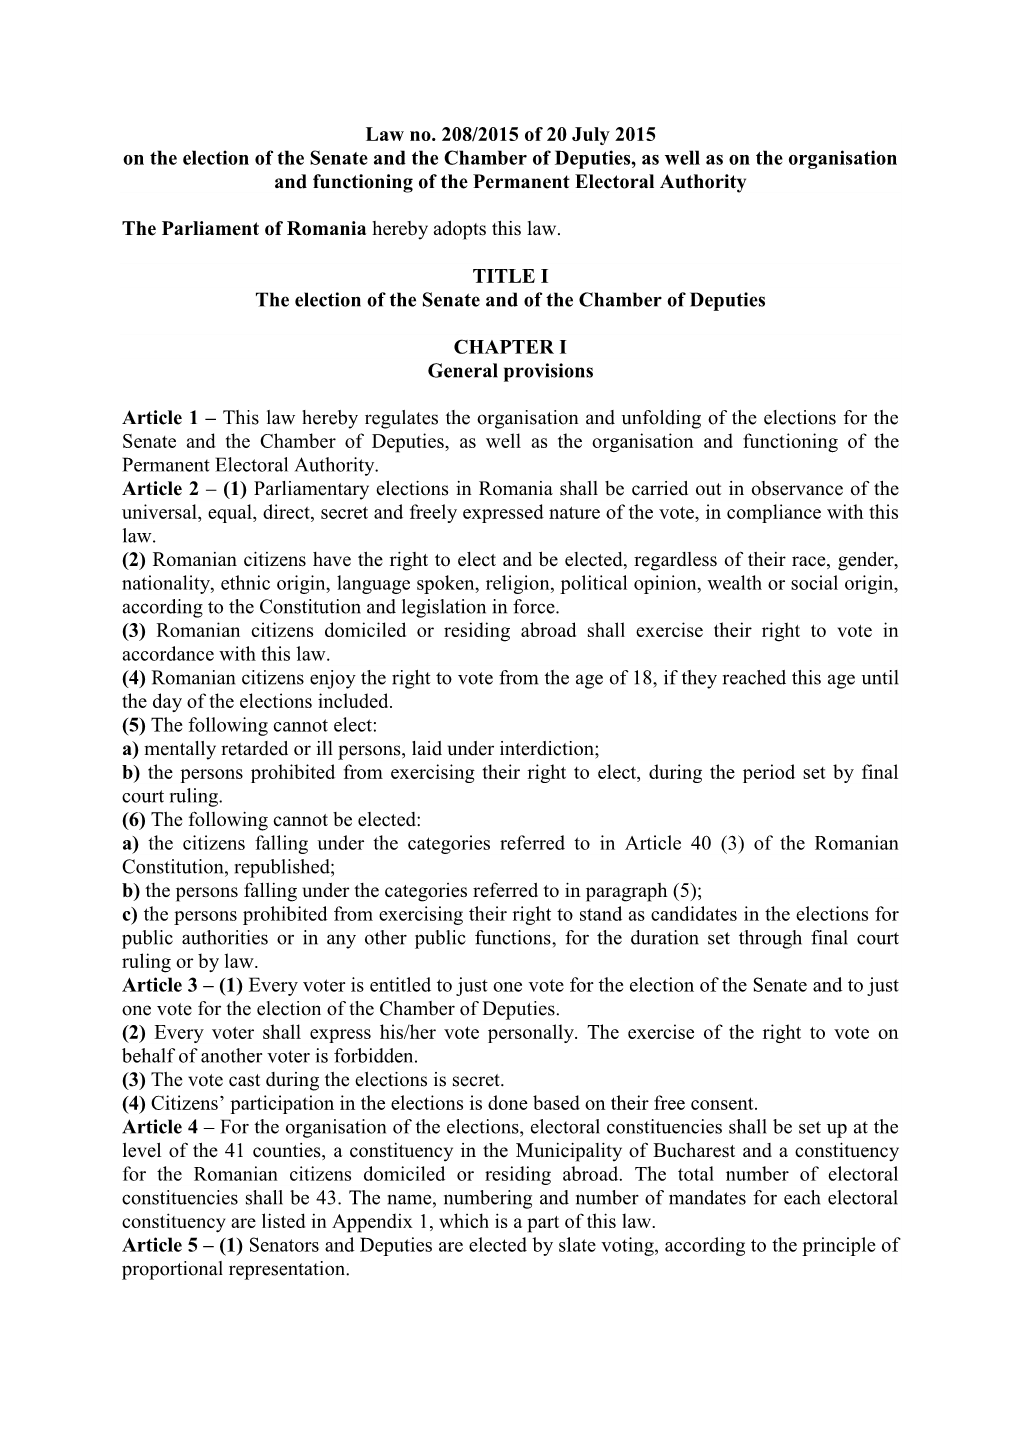 Law No. 208/2015 of 20 July 2015 on the Election of the Senate and the Chamber of Deputies, As Well As on the Organisation and F